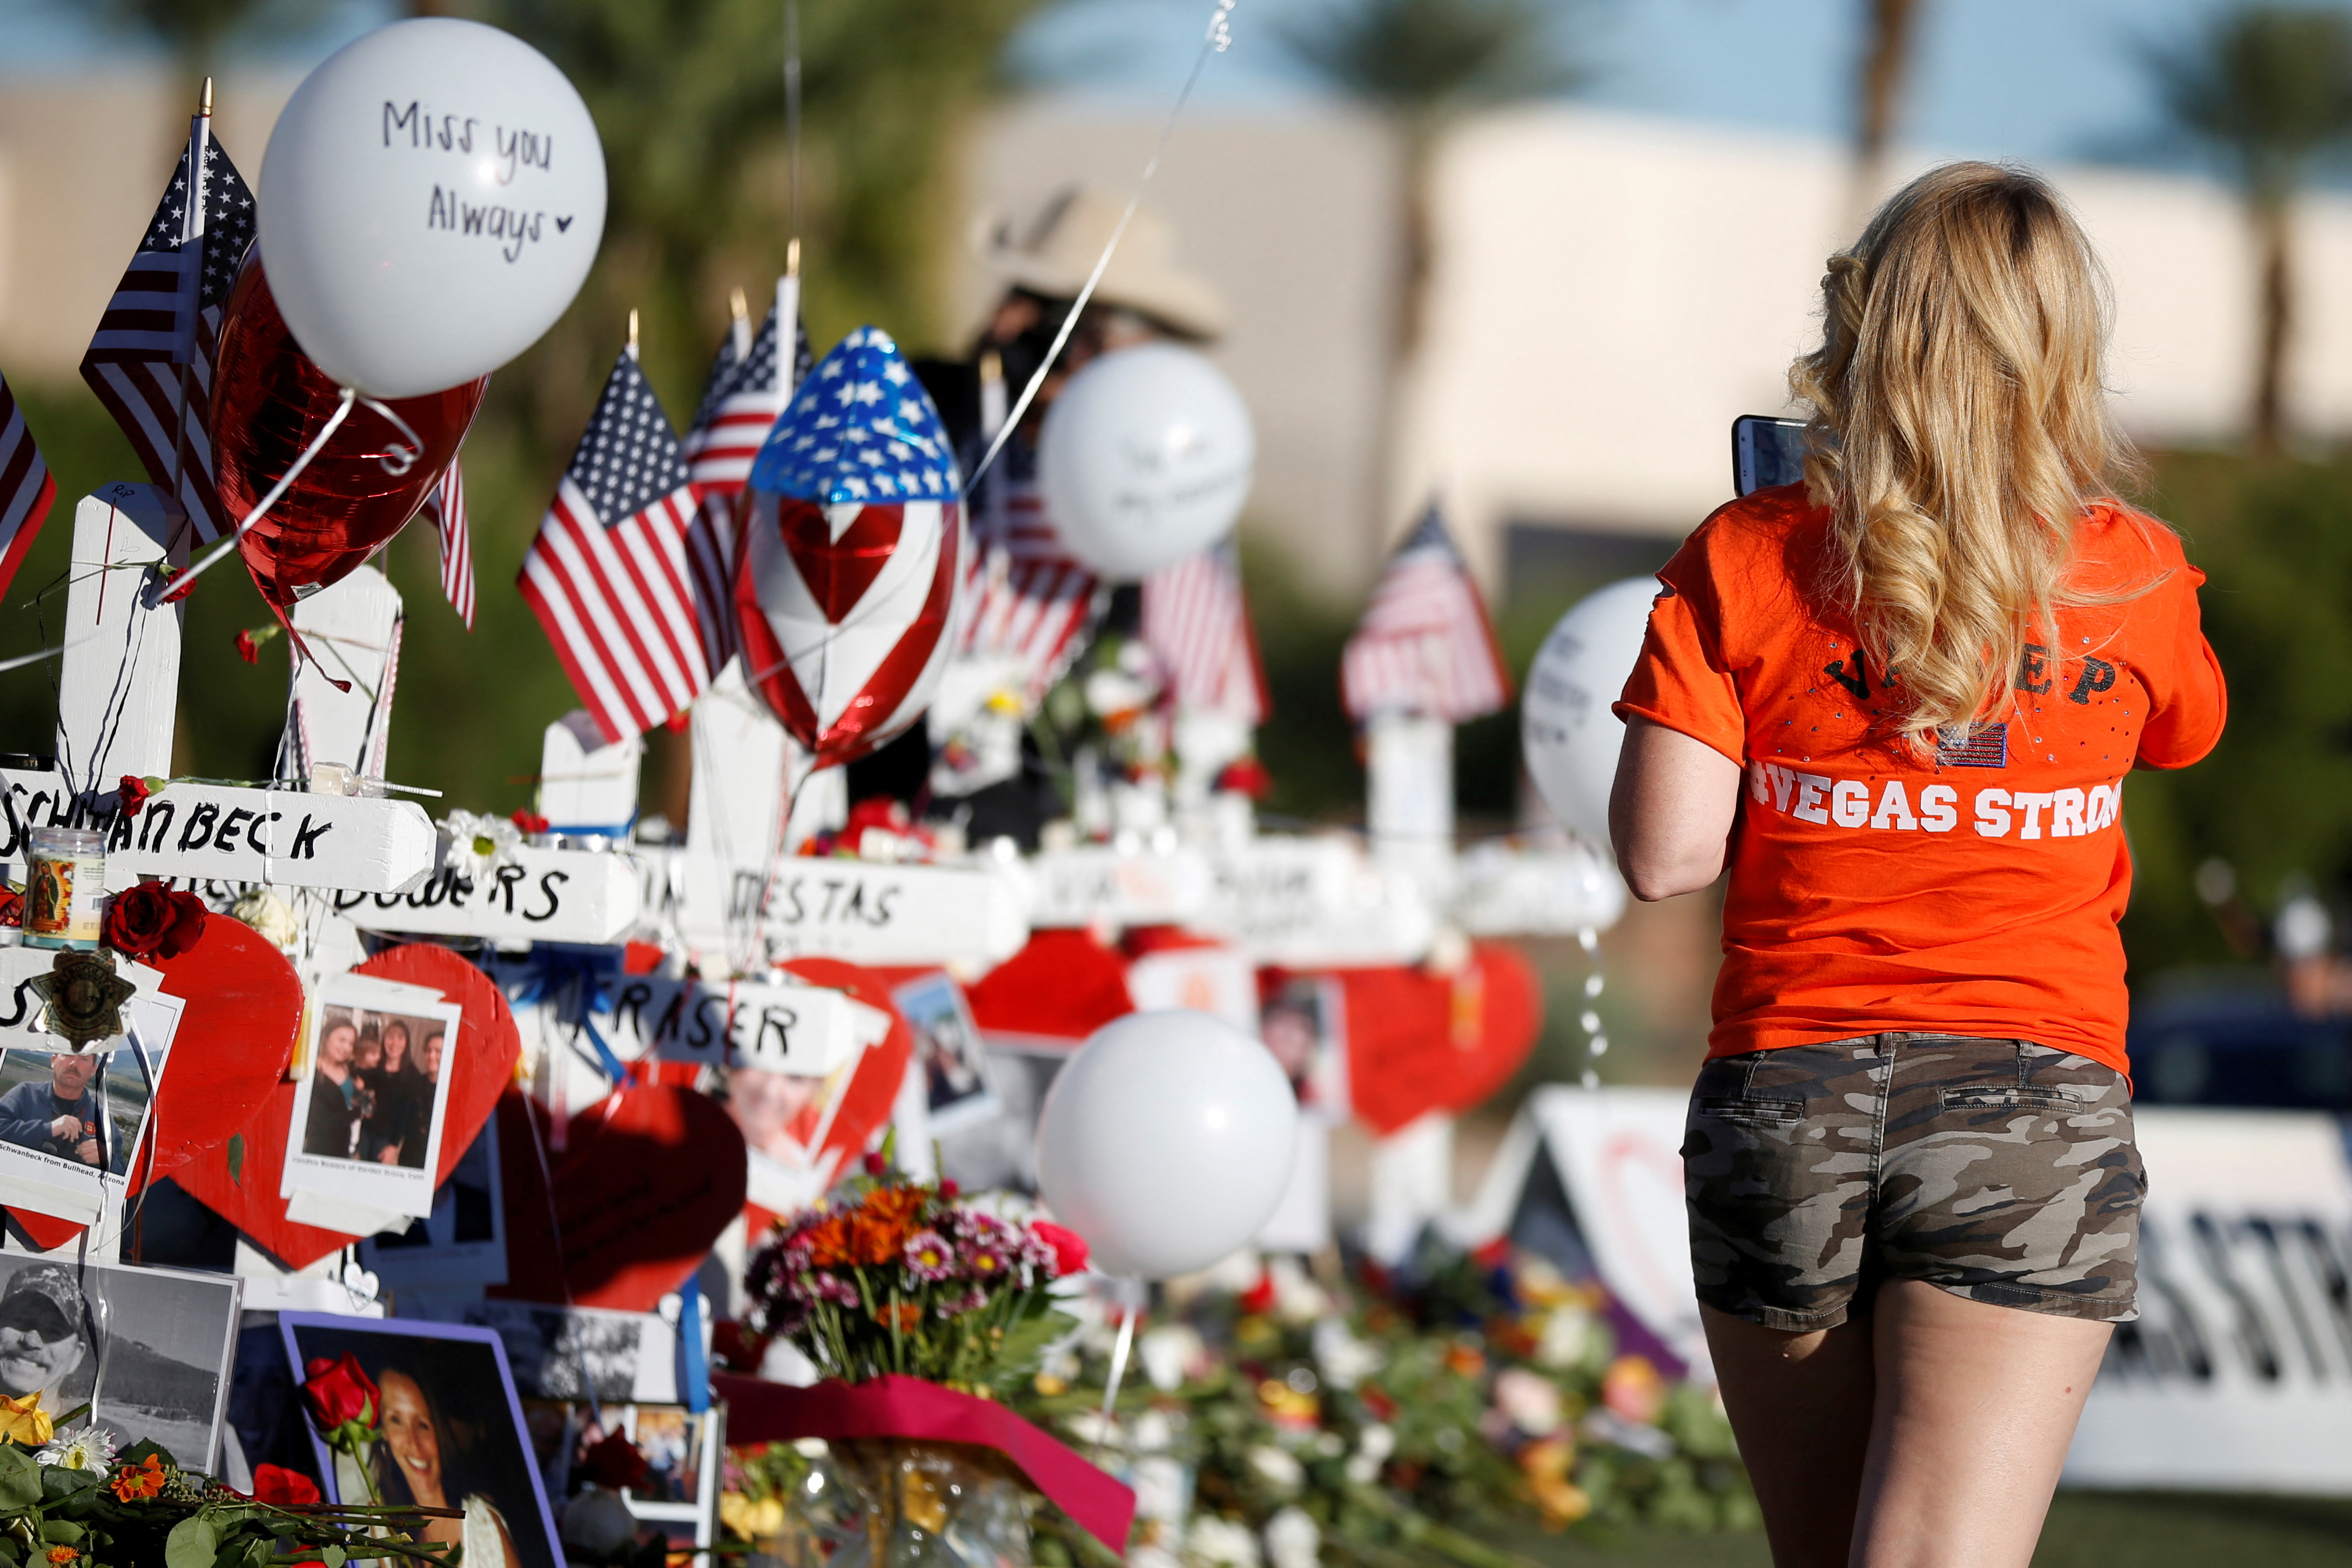 A woman looks at white crosses set up for the victims of the Route 91 Harvest music festival mass shooting in Las Vegas